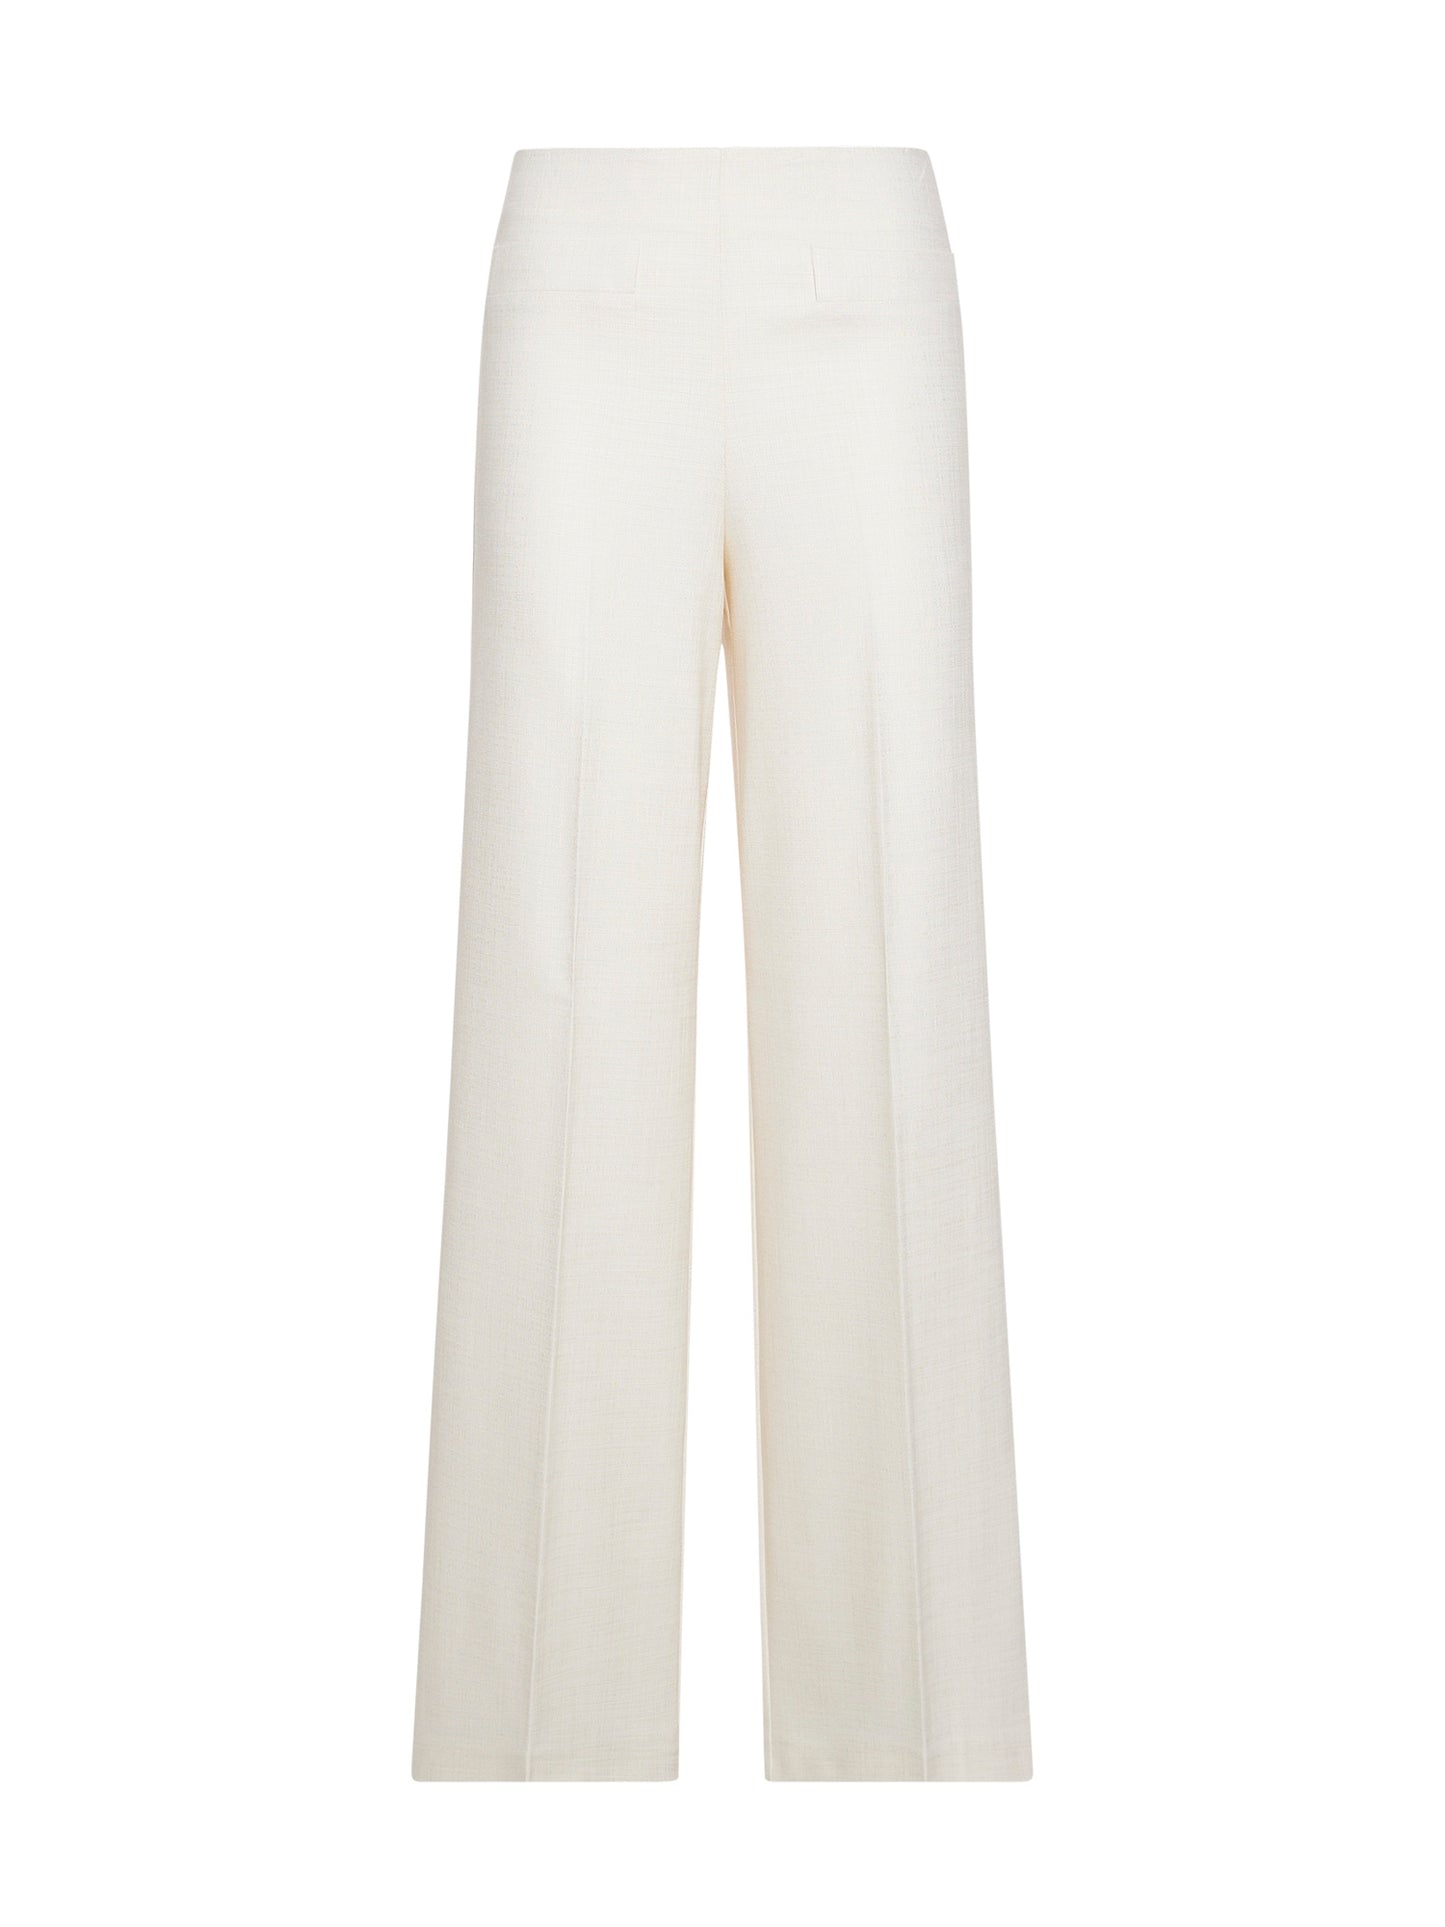 Wide trousers in luxury textured fabric